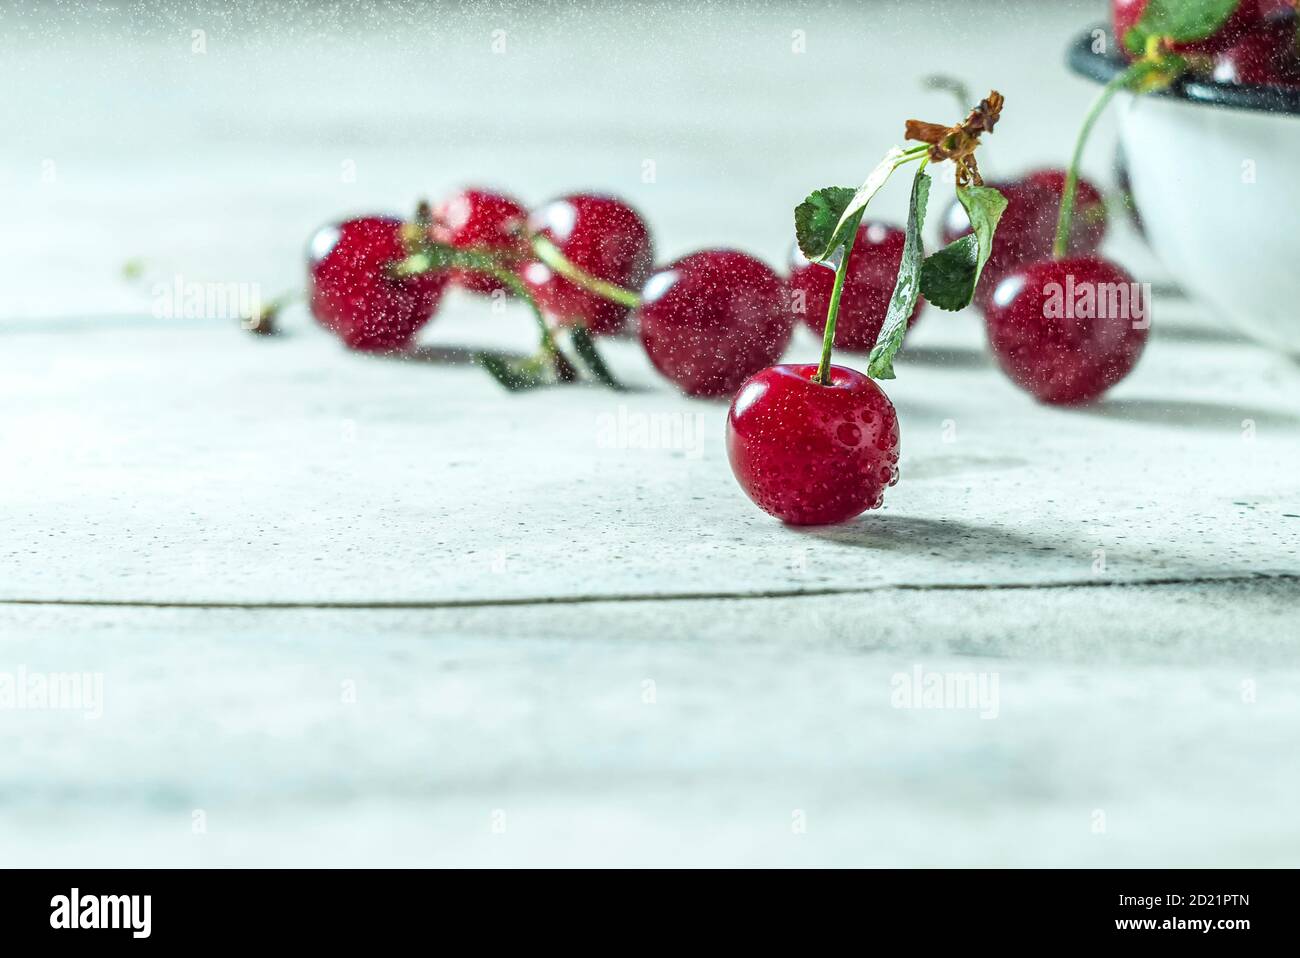 Close up image of sweet cherry on a light concrete background. Stock Photo